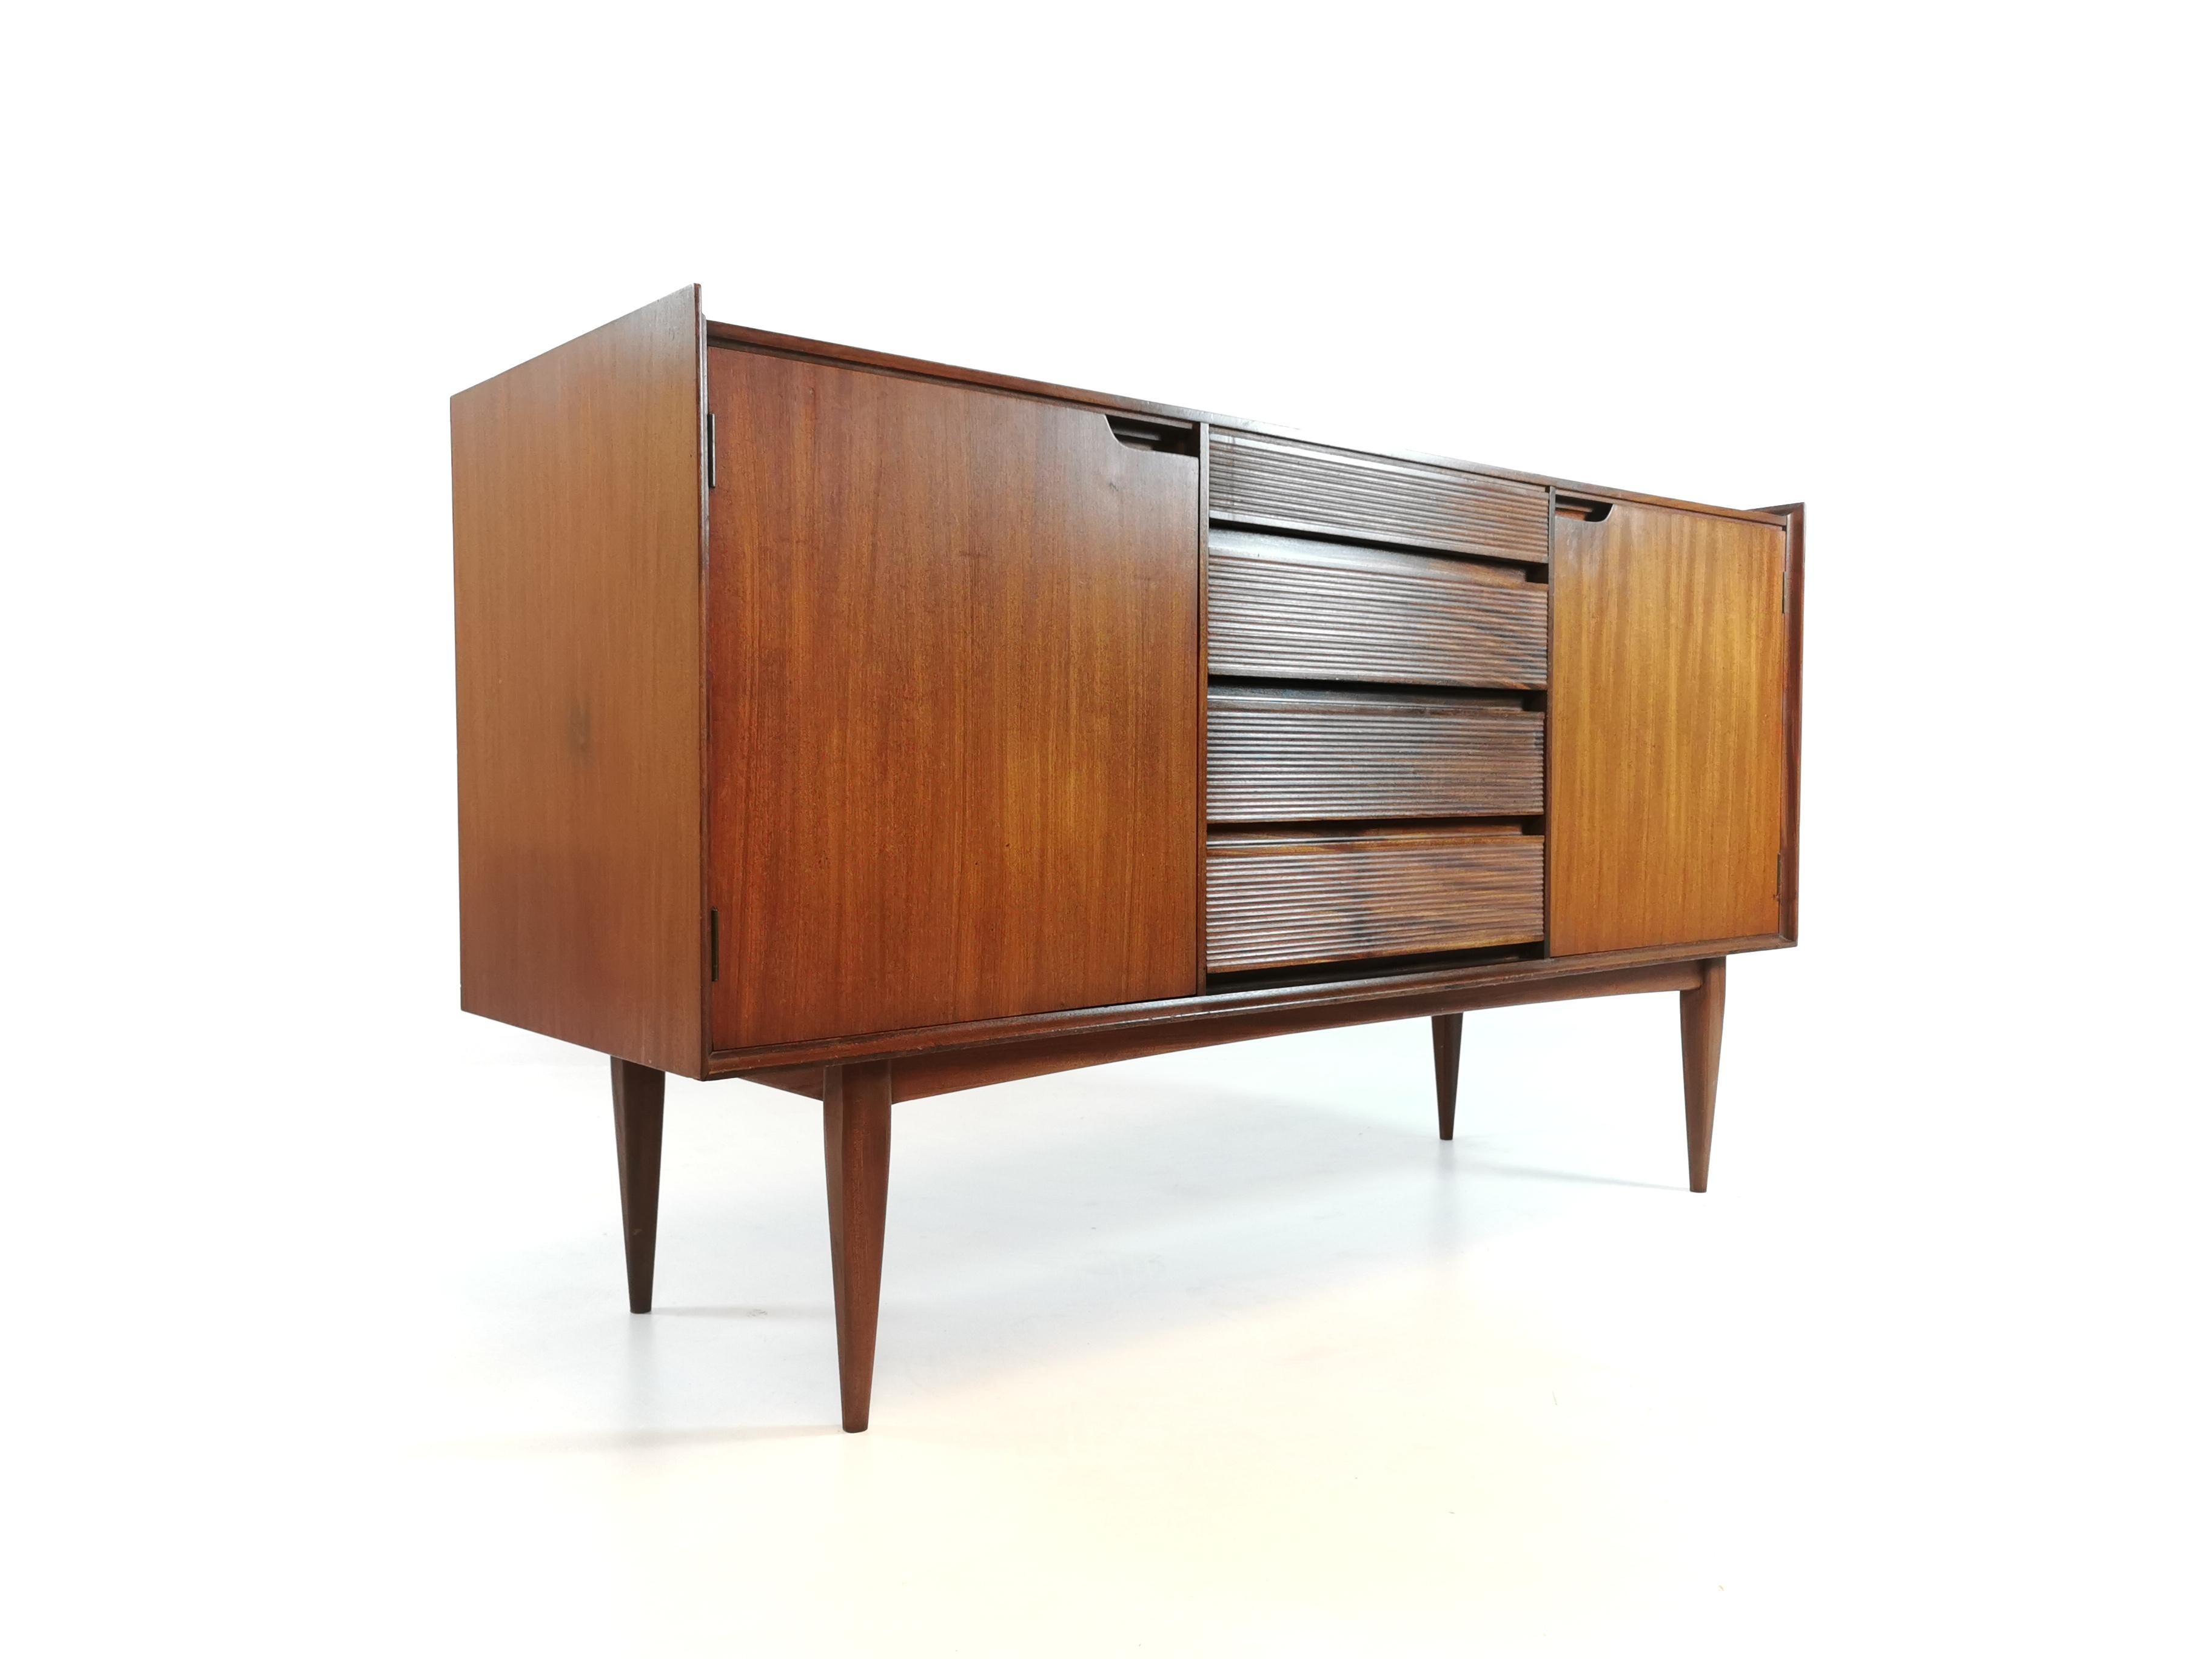 This sideboard was designed by Richard Hornby for Fyne Ladye Furniture Ltd. Made in the United Kingdom during the 1960s. 

The sideboard features four drawers and two shelved cupboard storage spaces.

Made with Afromosia.